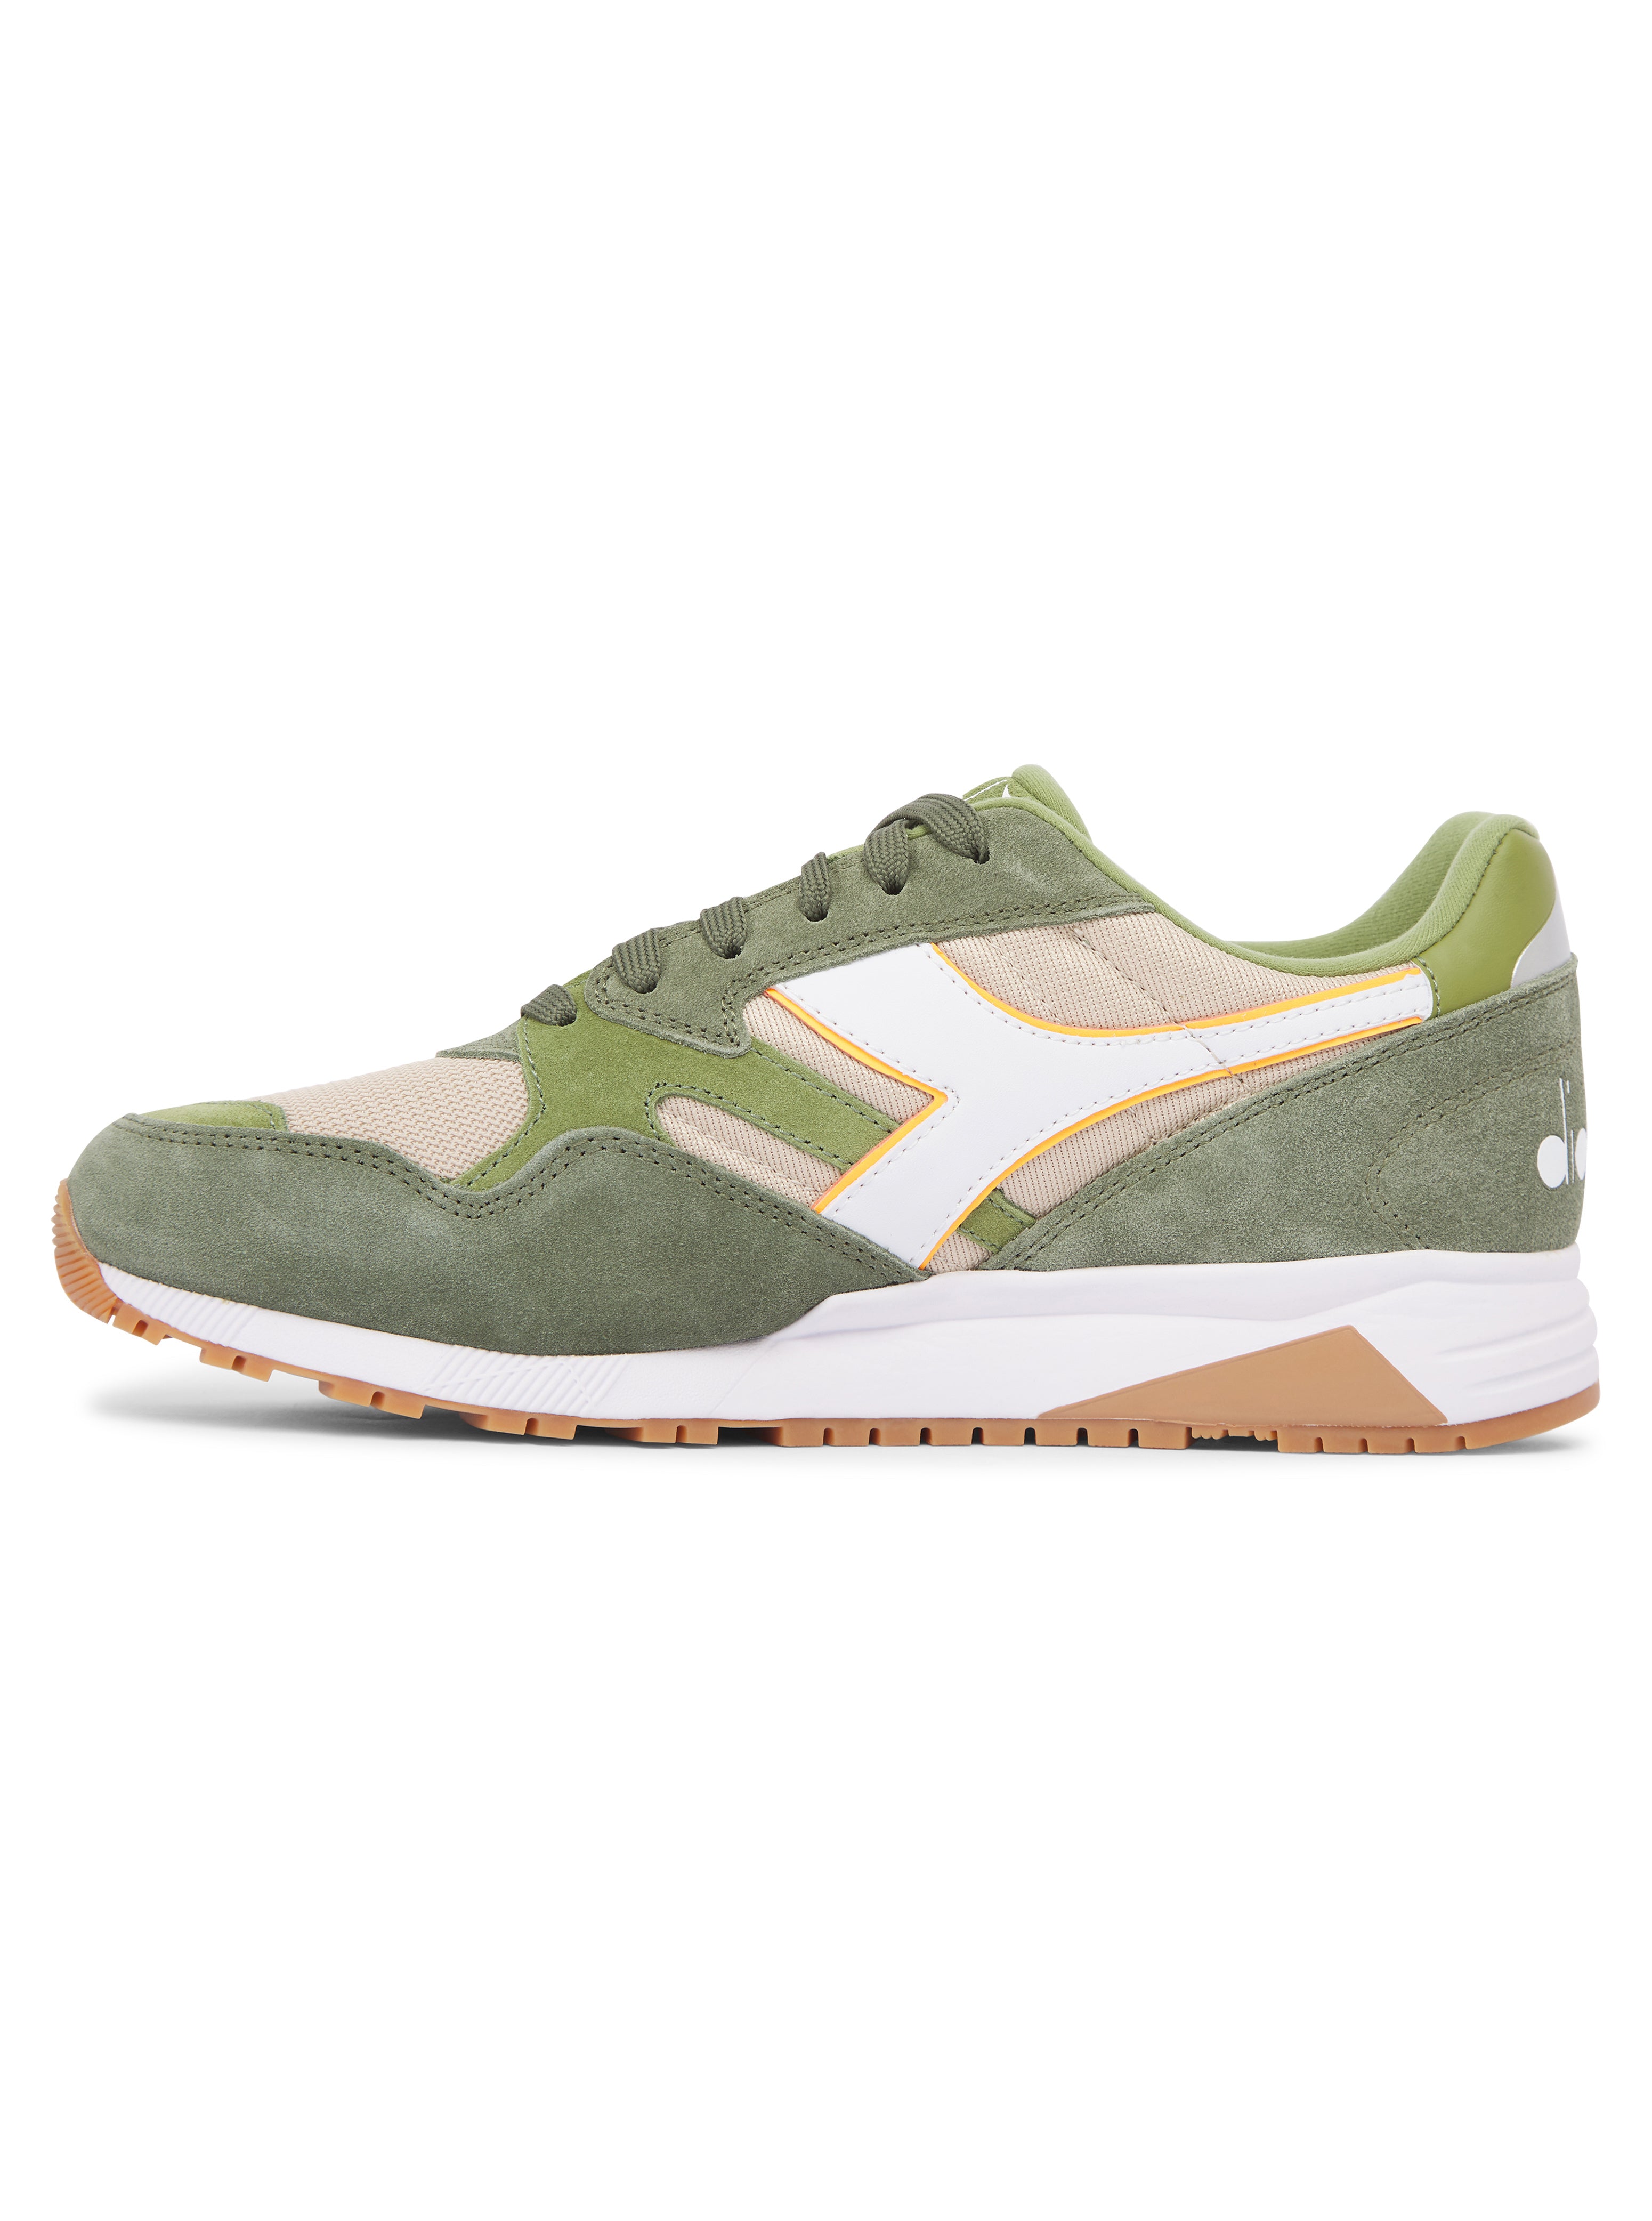 Load image into Gallery viewer, Diadora N902 Trainer Olive
